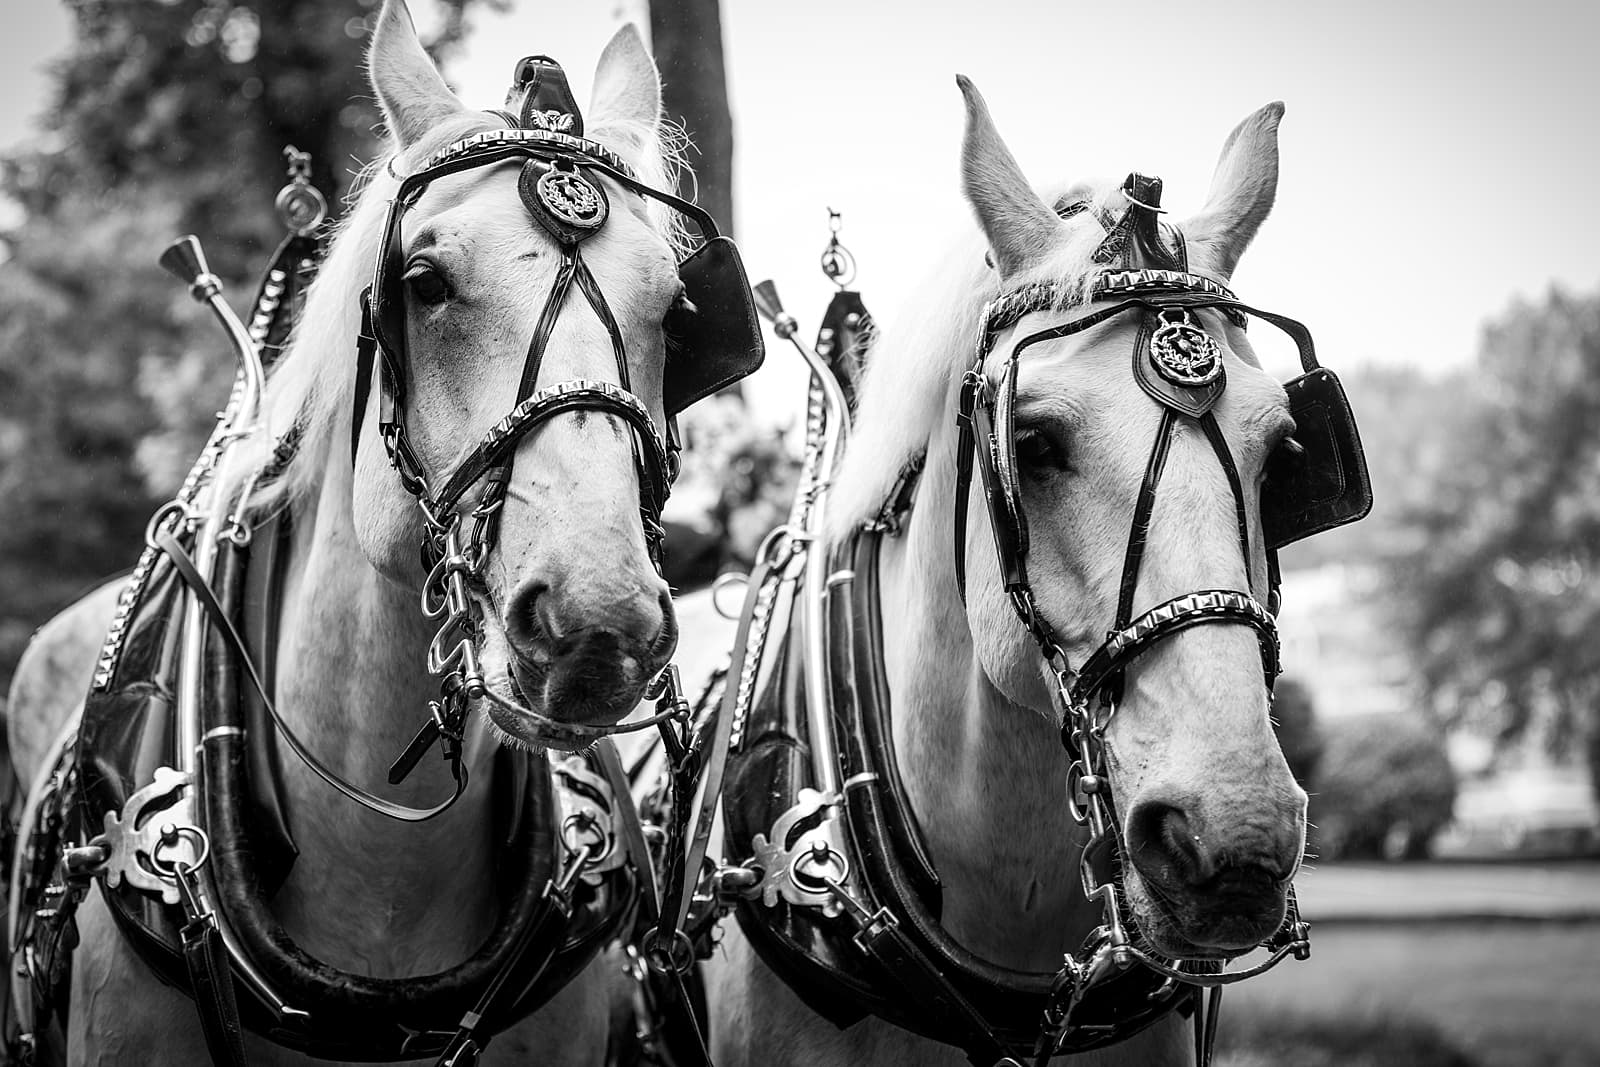 fairytale wedding, black and white, horses, horse drawn carriage 